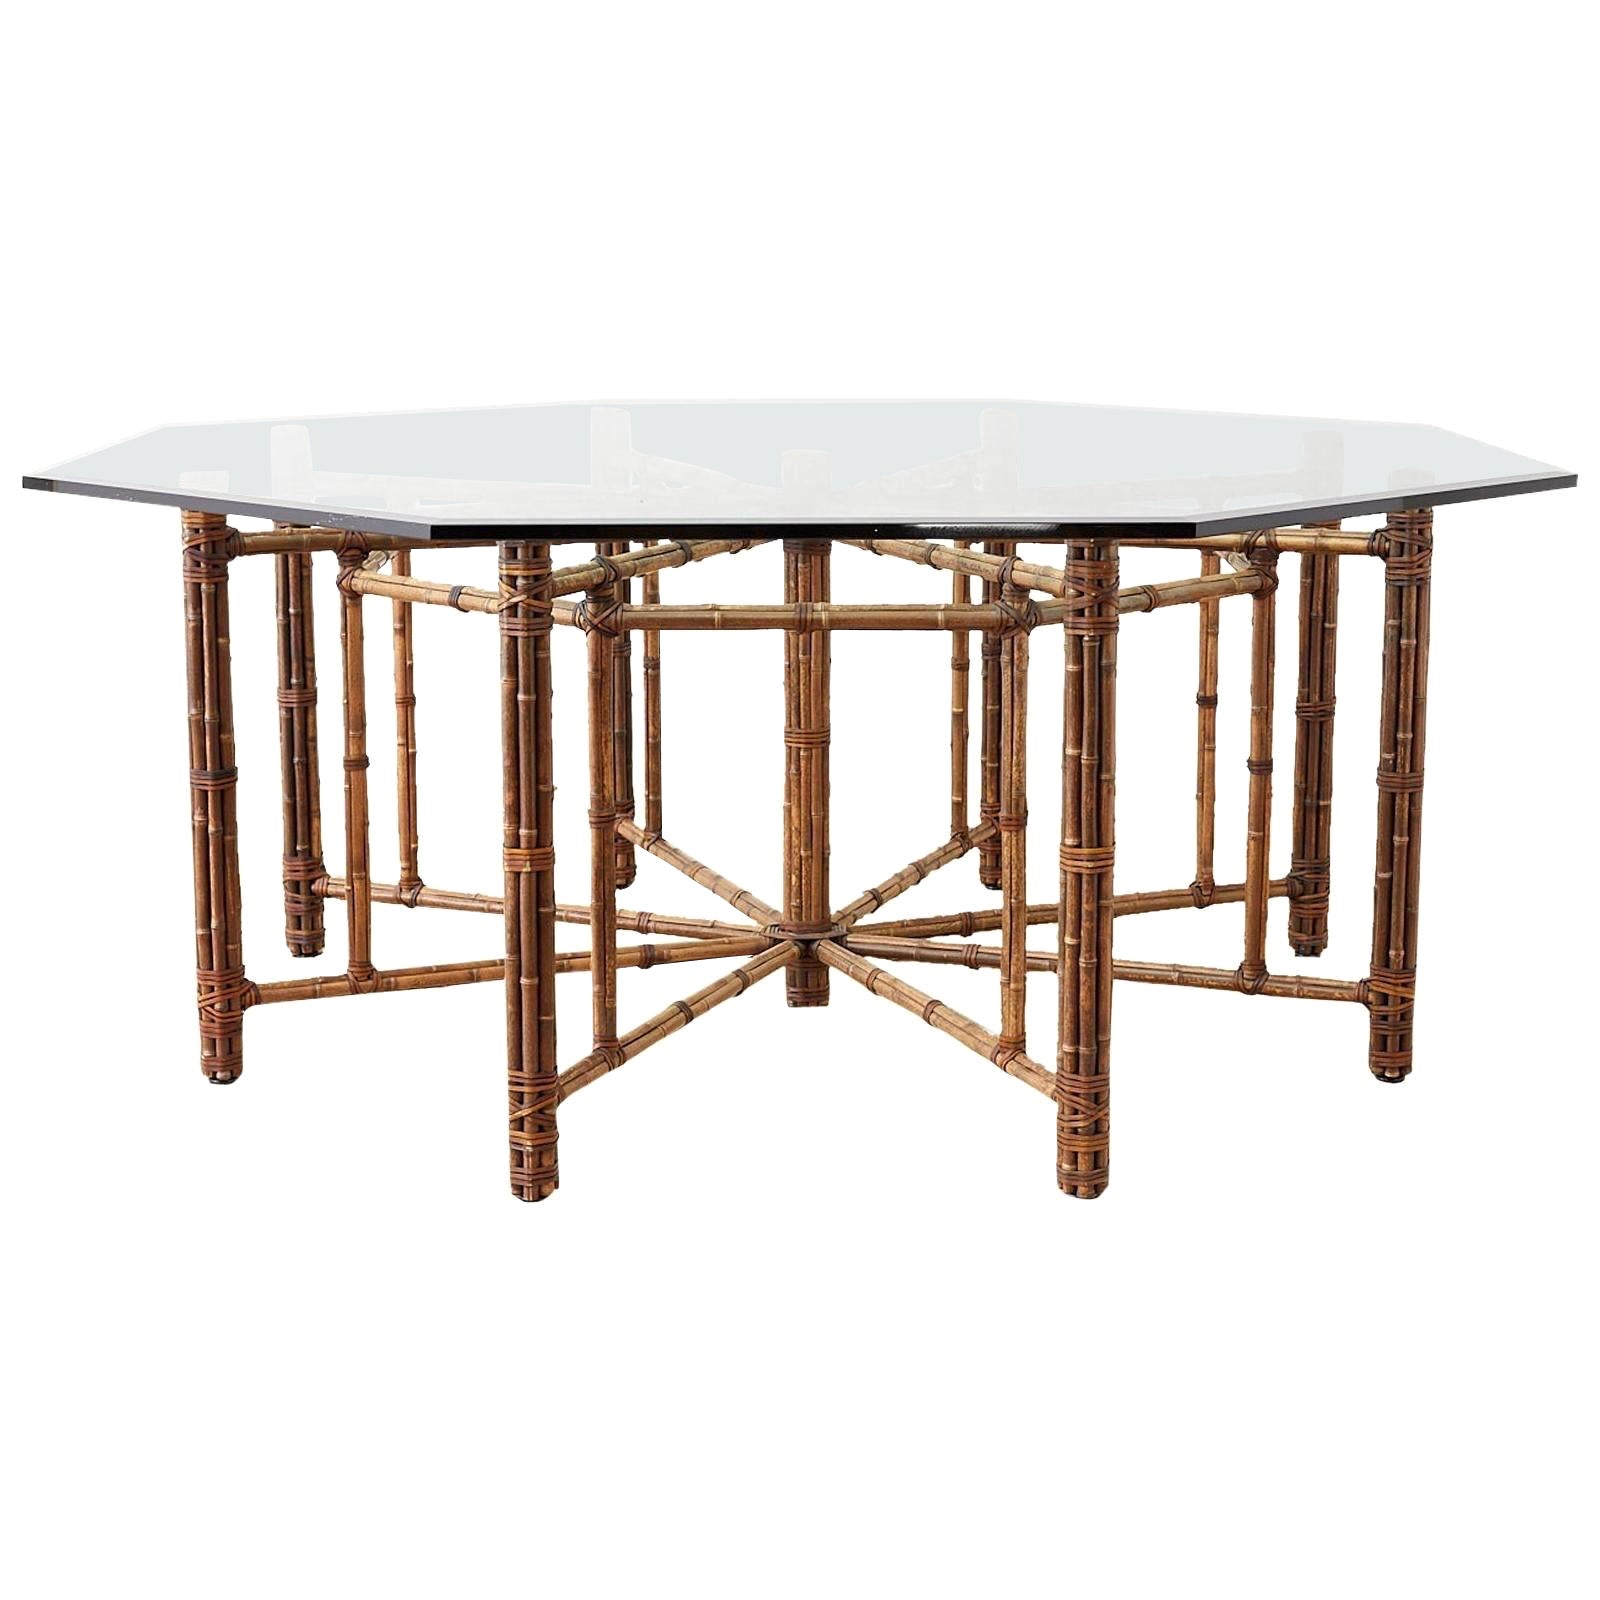 McGuire California Modern Octagonal Bamboo Rattan and Glass Dining Table